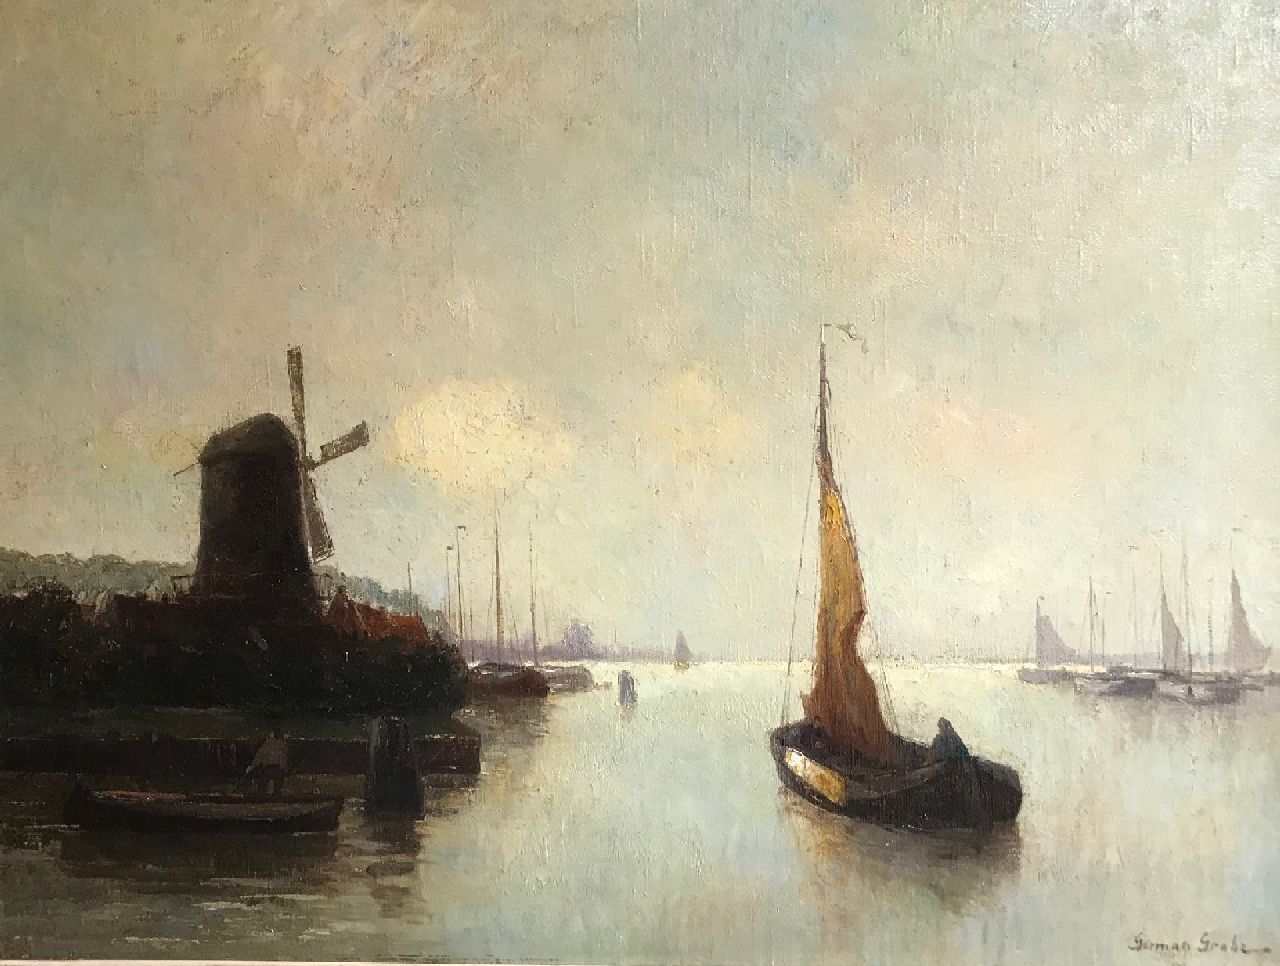 Grobe P.G.  | Philipp 'German' Grobe | Paintings offered for sale | Mill on the outskirts of town with harbor and sailing boat, oil on canvas 60.0 x 80.5 cm, signed l.r.